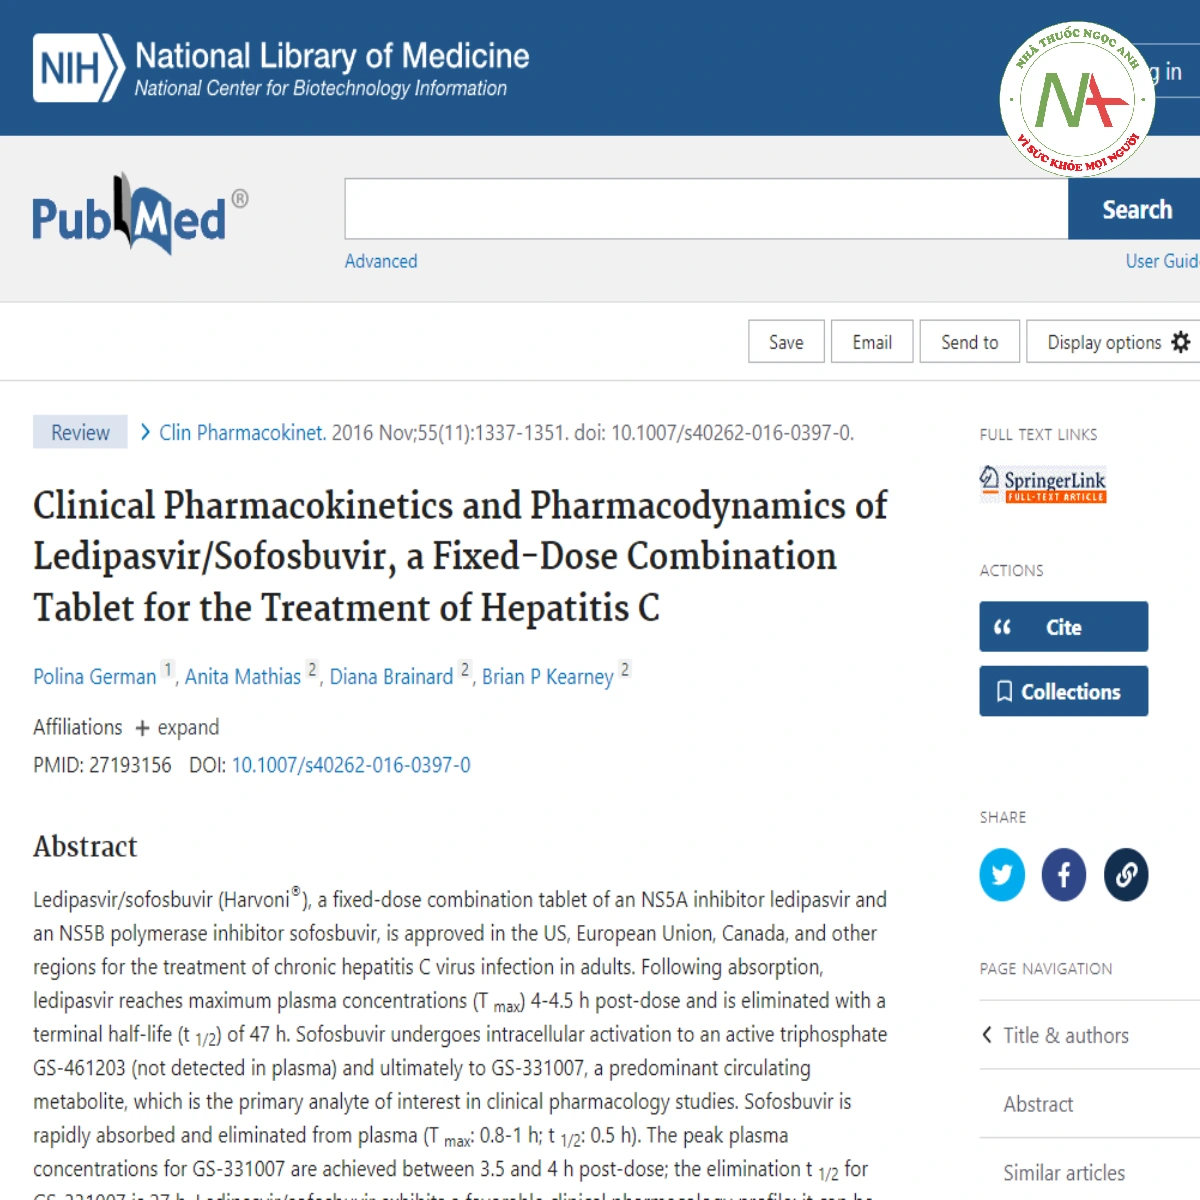 Clinical Pharmacokinetics and Pharmacodynamics of Ledipasvir/Sofosbuvir, a Fixed-Dose Combination Tablet for the Treatment of Hepatitis C